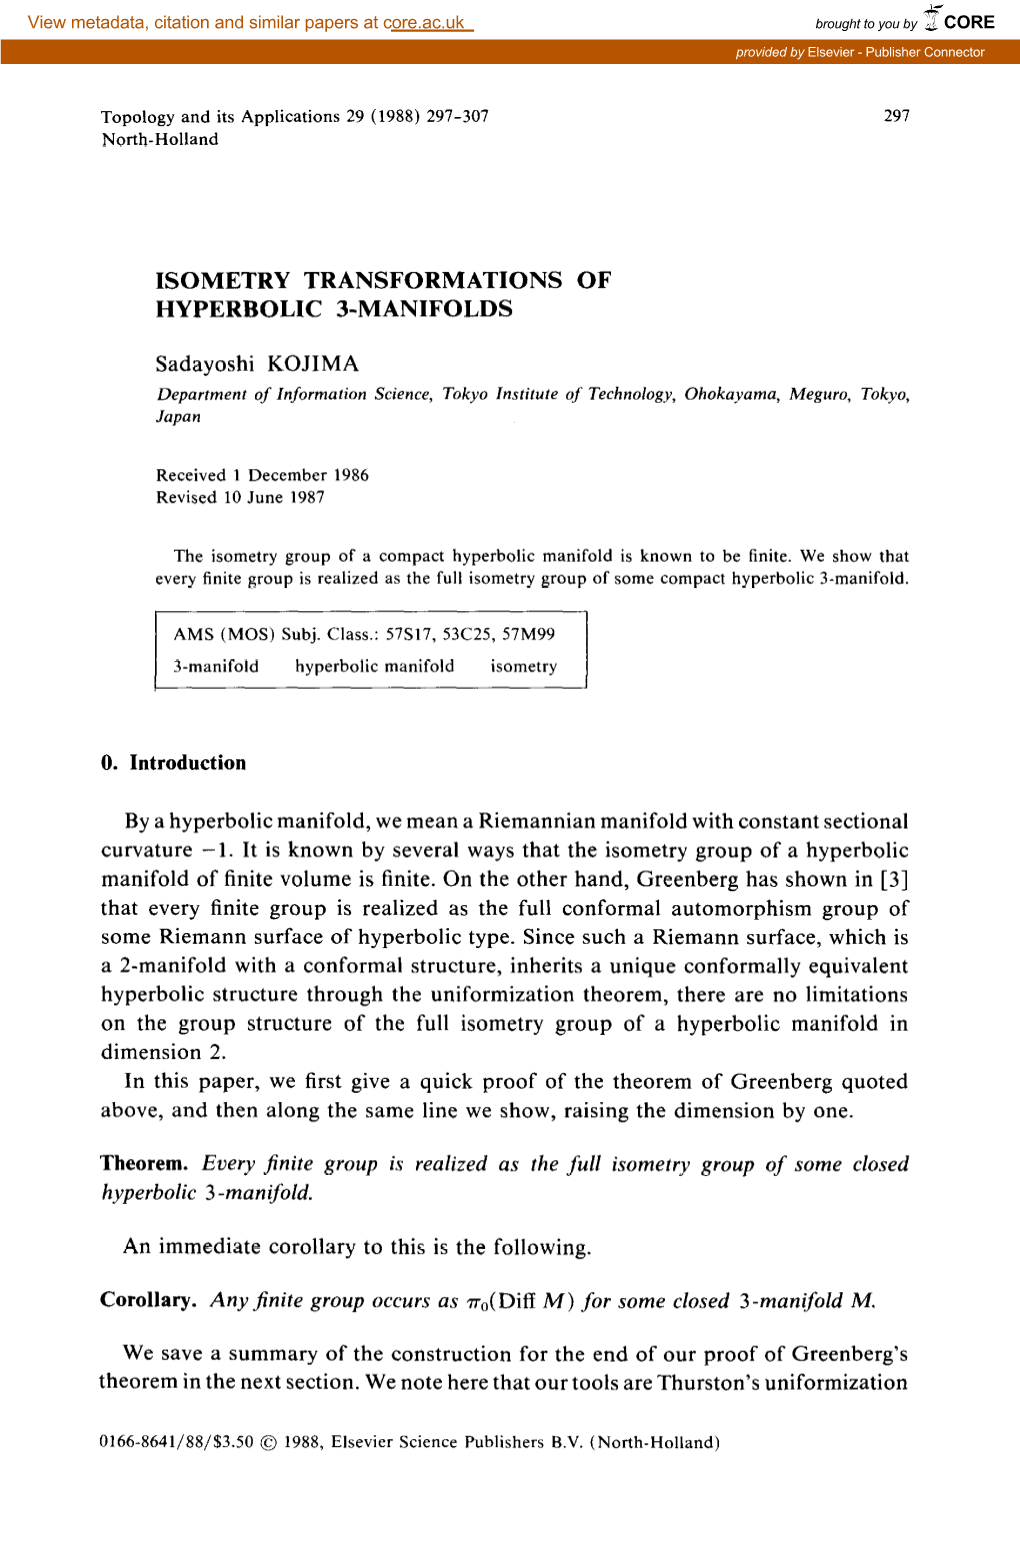 ISOMETRY TRANSFORMATIONS of HYPERBOLIC 3-MANIFOLDS Sadayoshi KOJIMA 0. Introduction by a Hyperbolic Manifold, We Mean a Riemanni